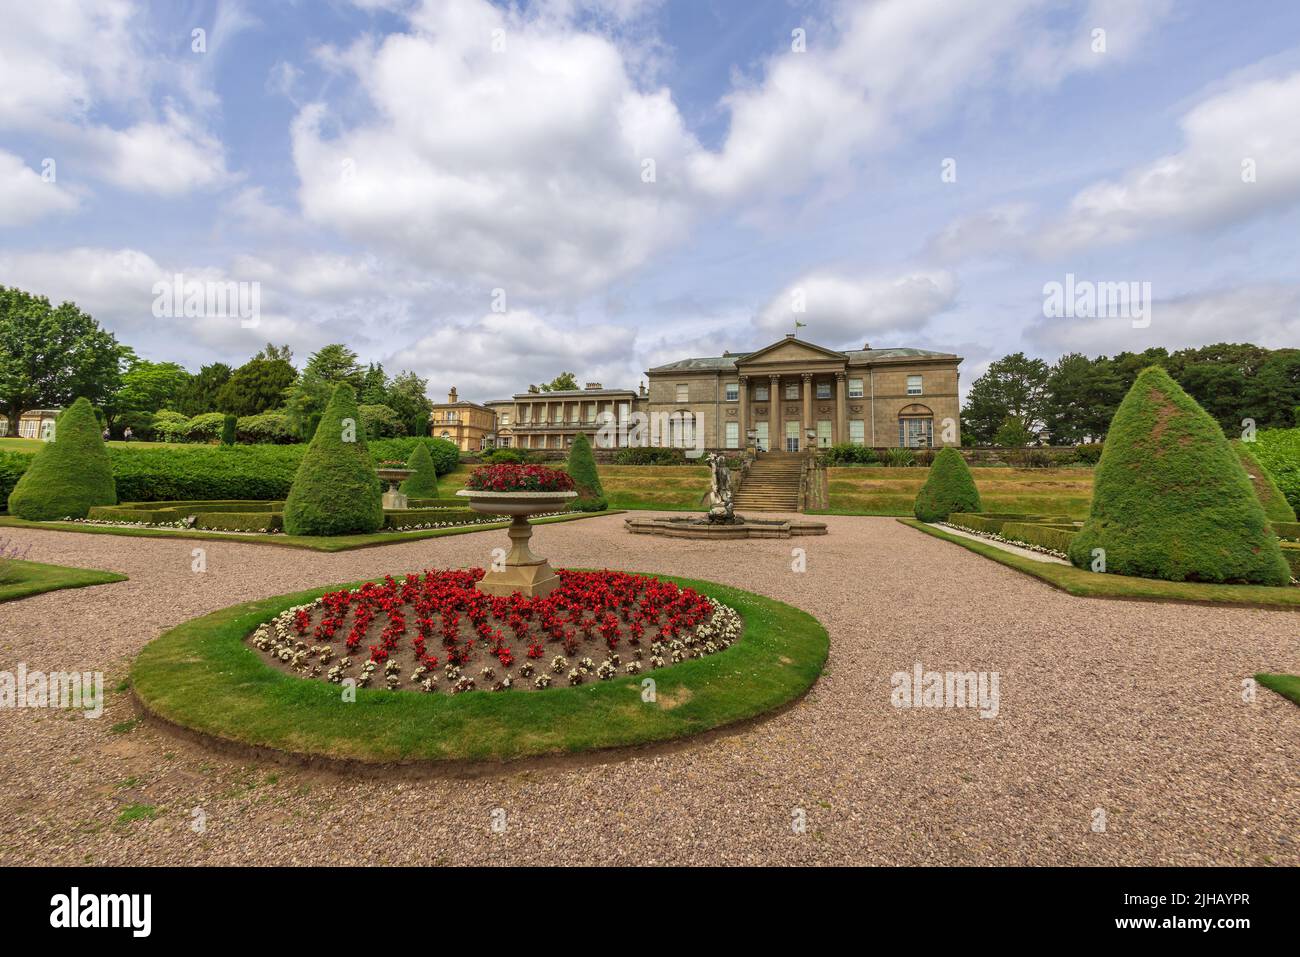 The South facade and formal gardens of historic Tatton Hall park and estate in Cheshire, England. Stock Photo